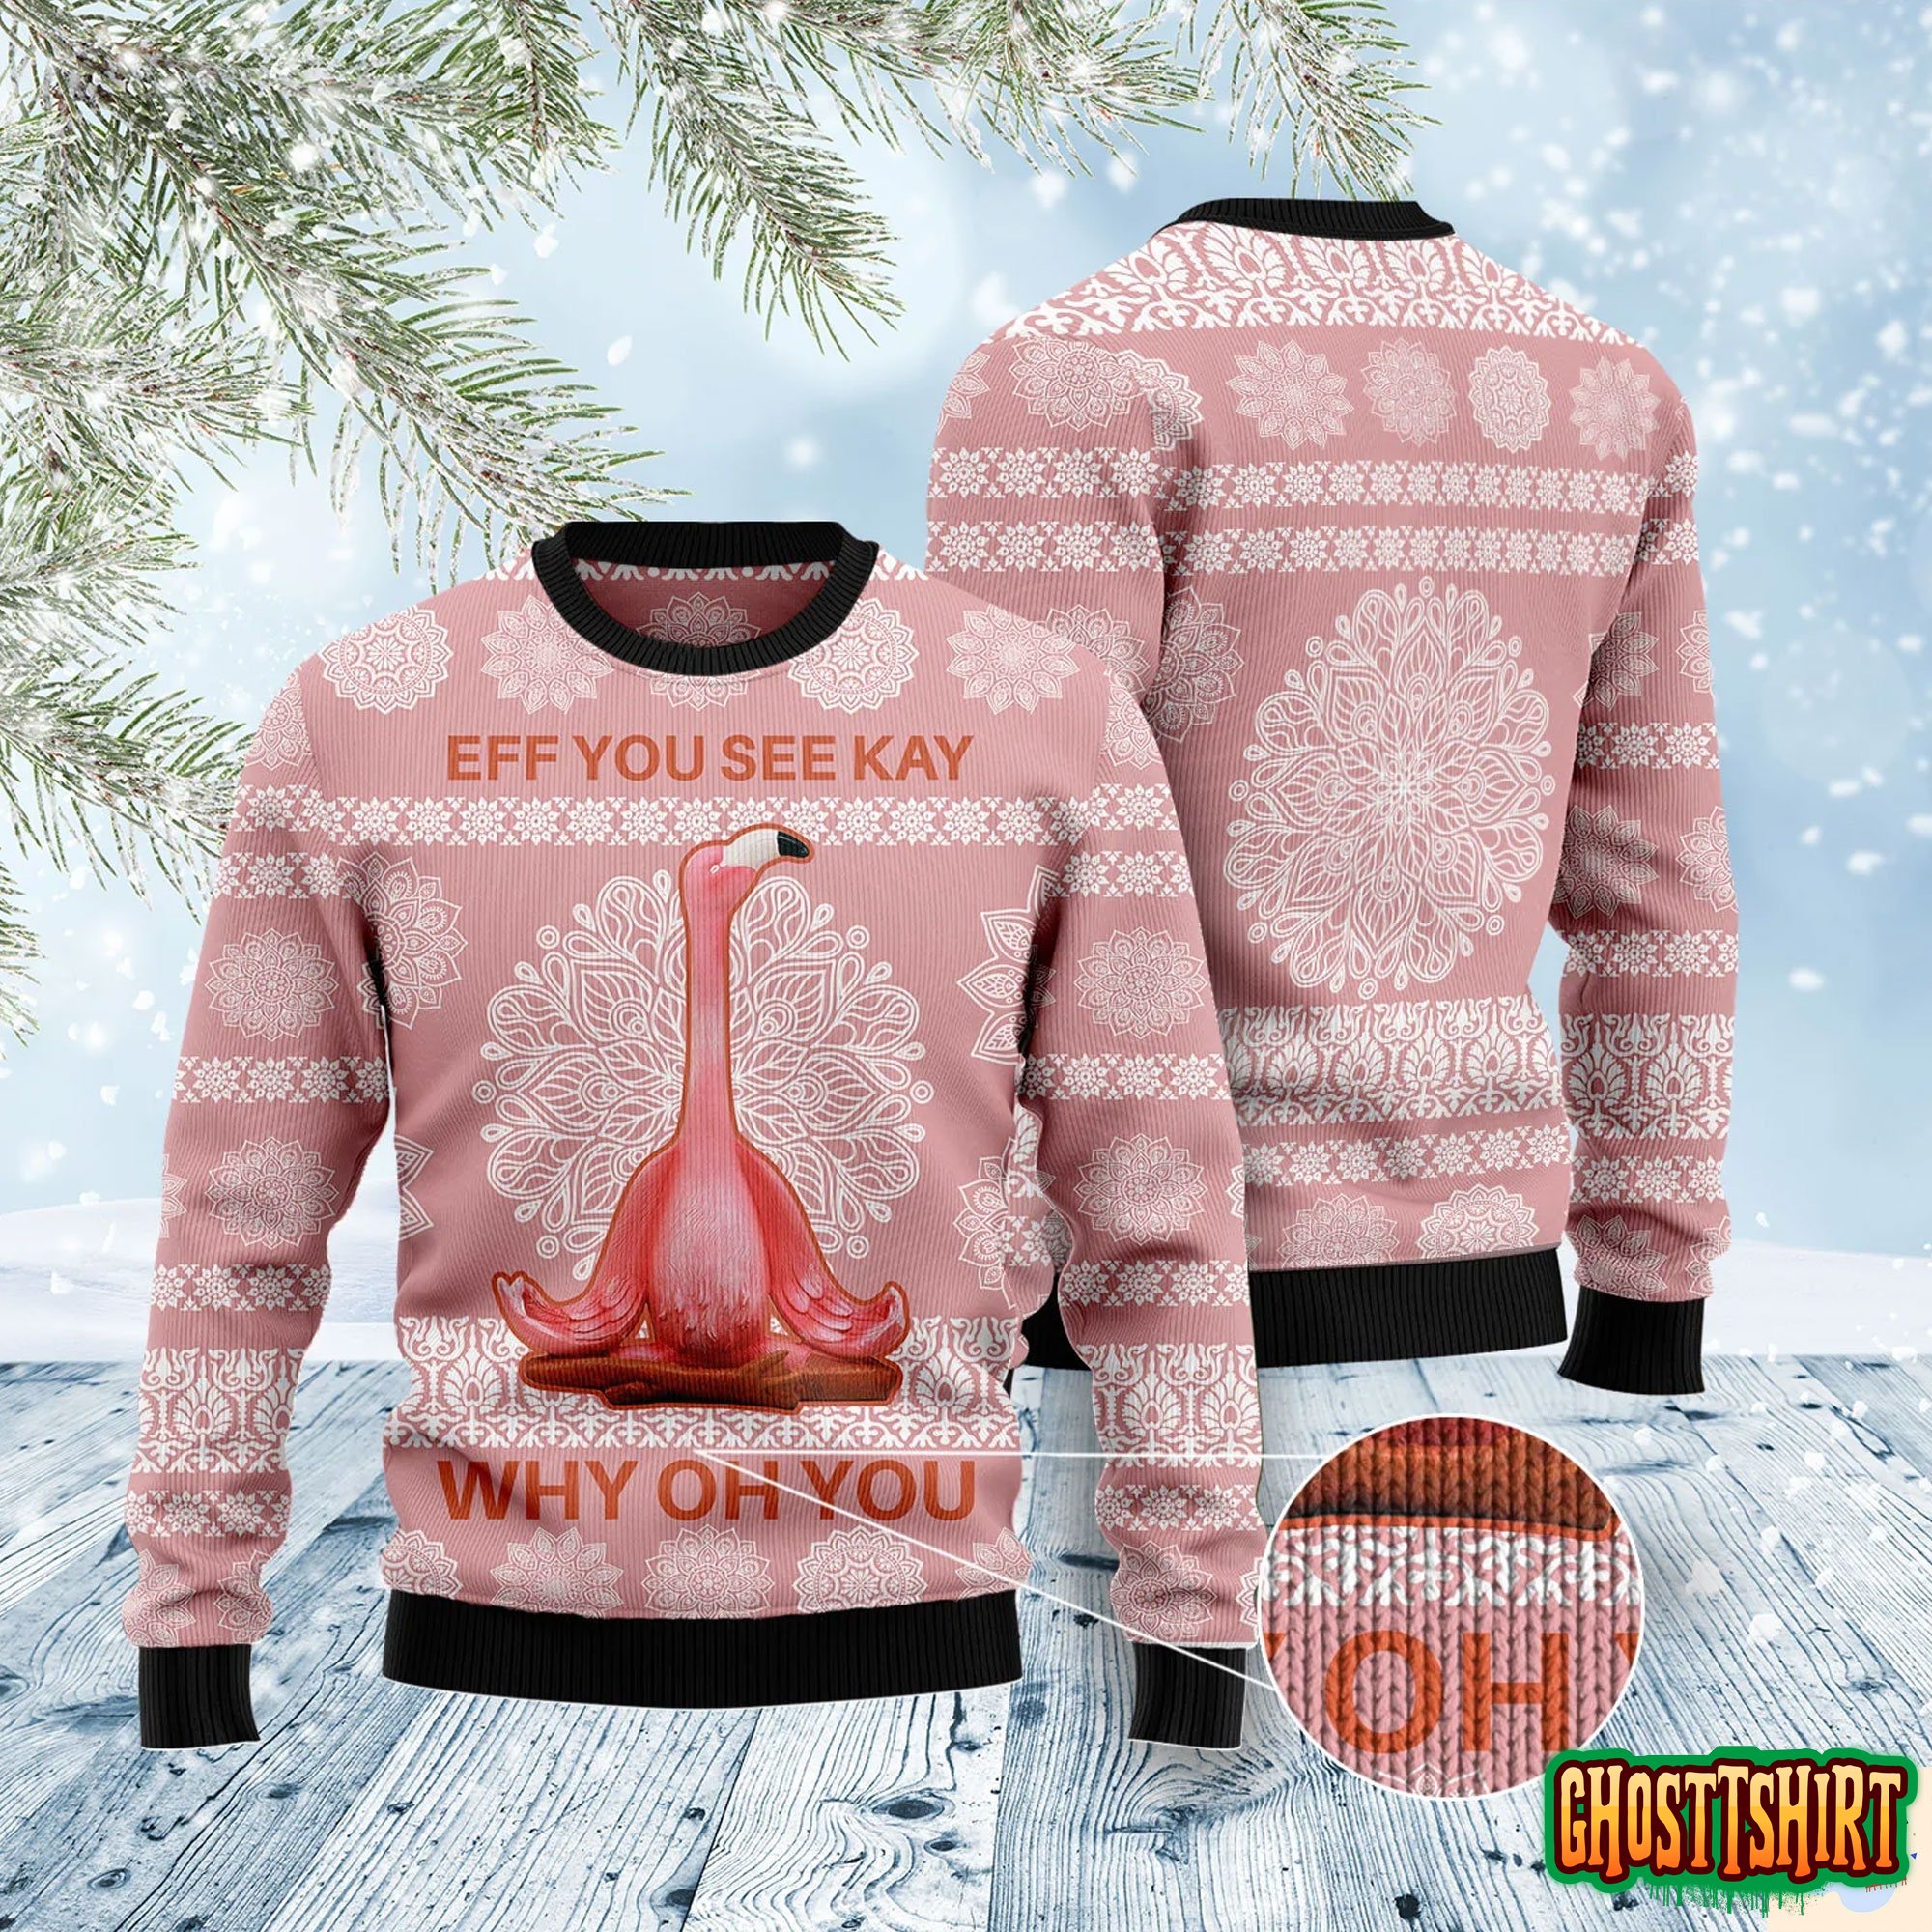 All I Want For Christmas Is More Time For Softball Ugly Christmas Sweater